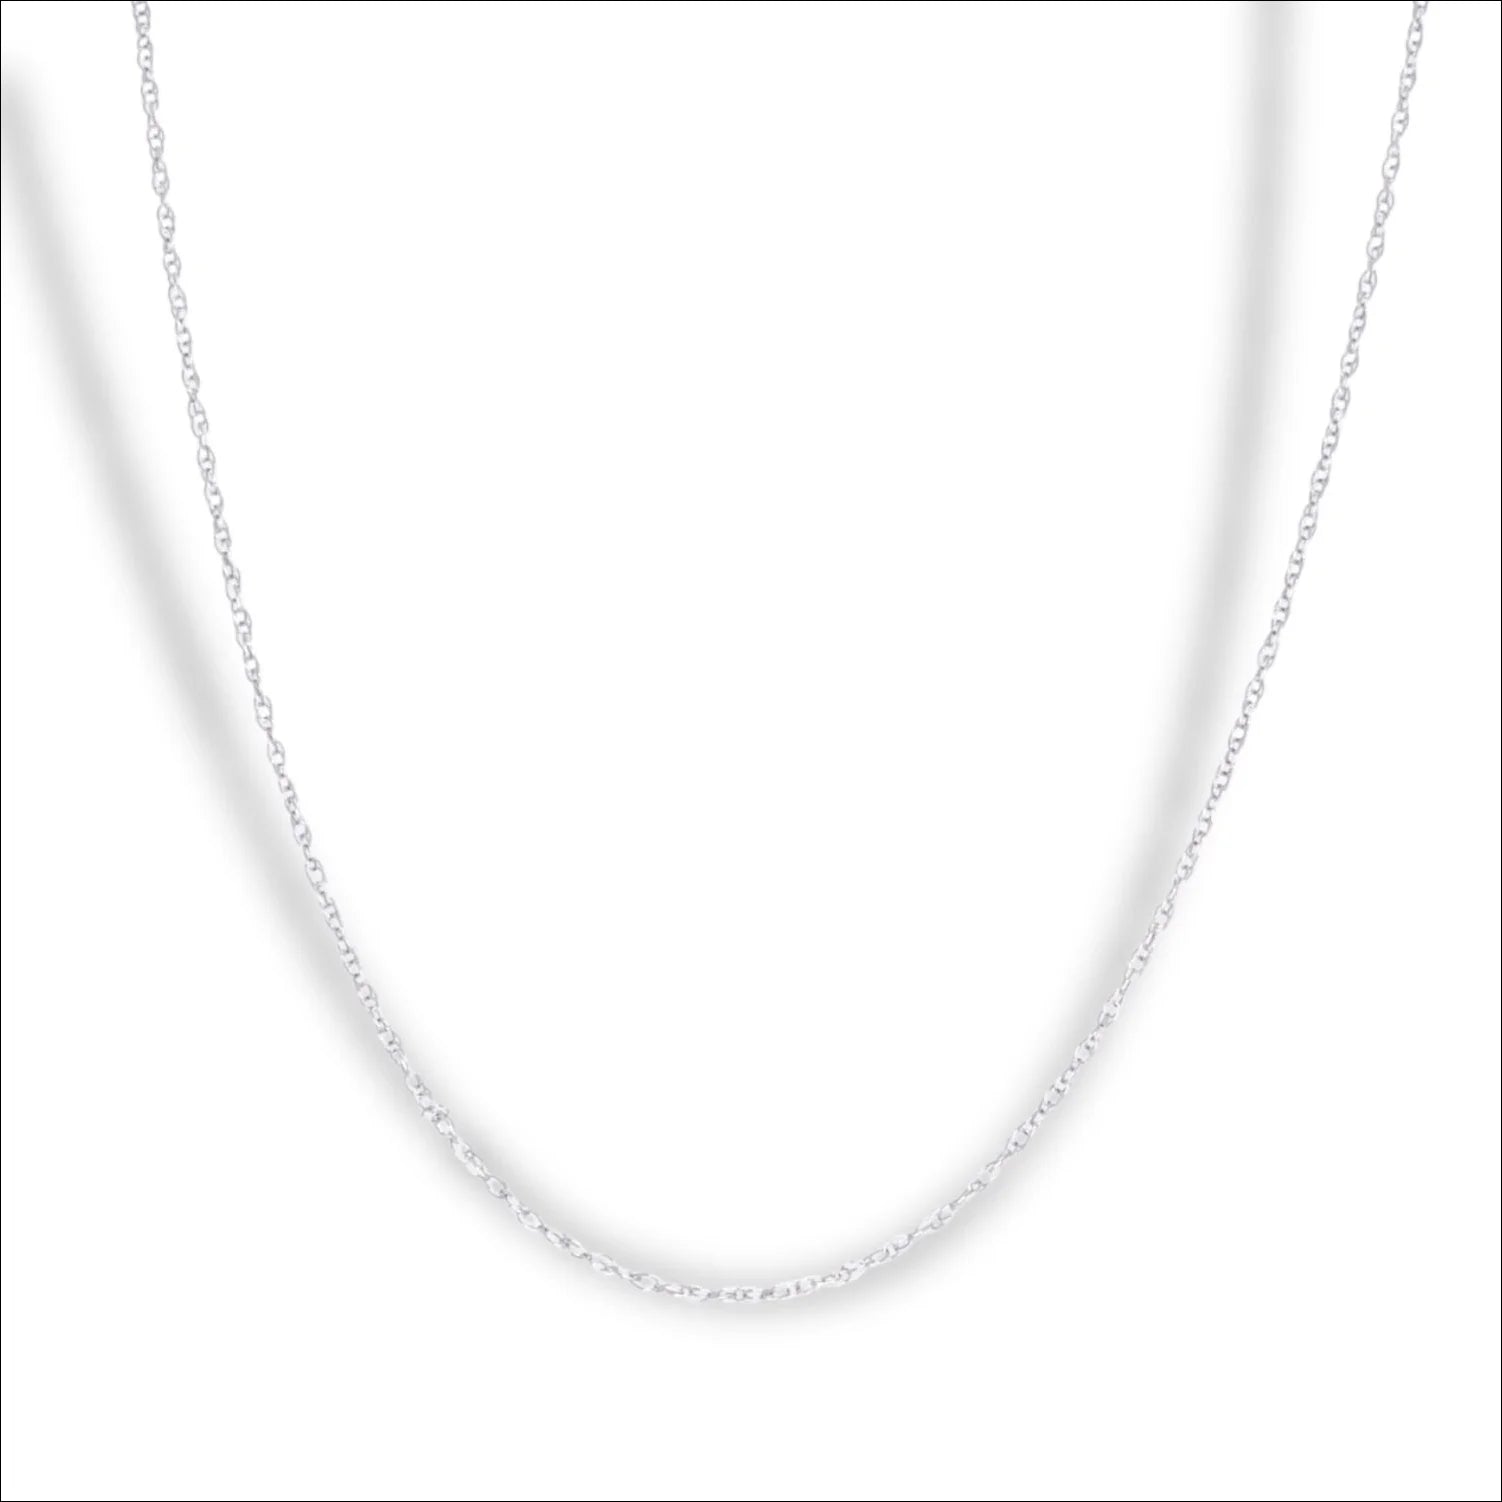 Dainty 14k white gold rope chain | Chains